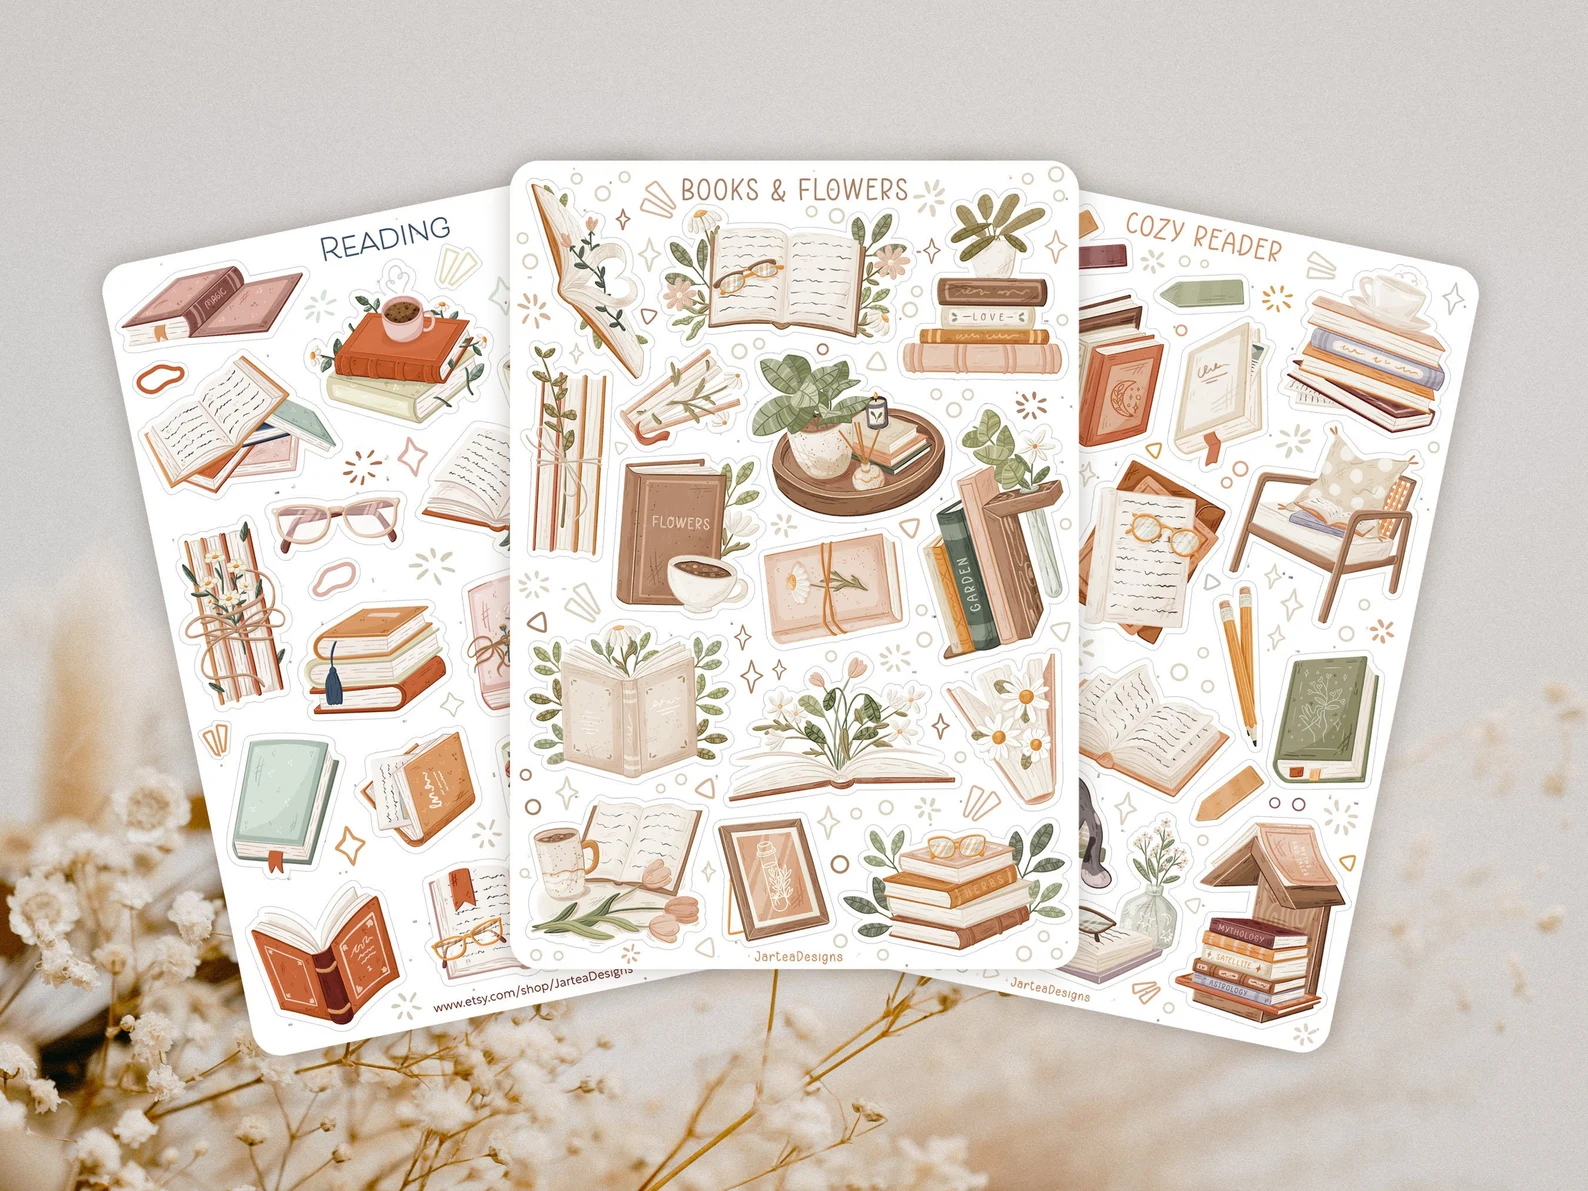 Three sticker sheets featuring earth-toned stickers of open books, books and plants, pens, reading glasses, and book stacks.